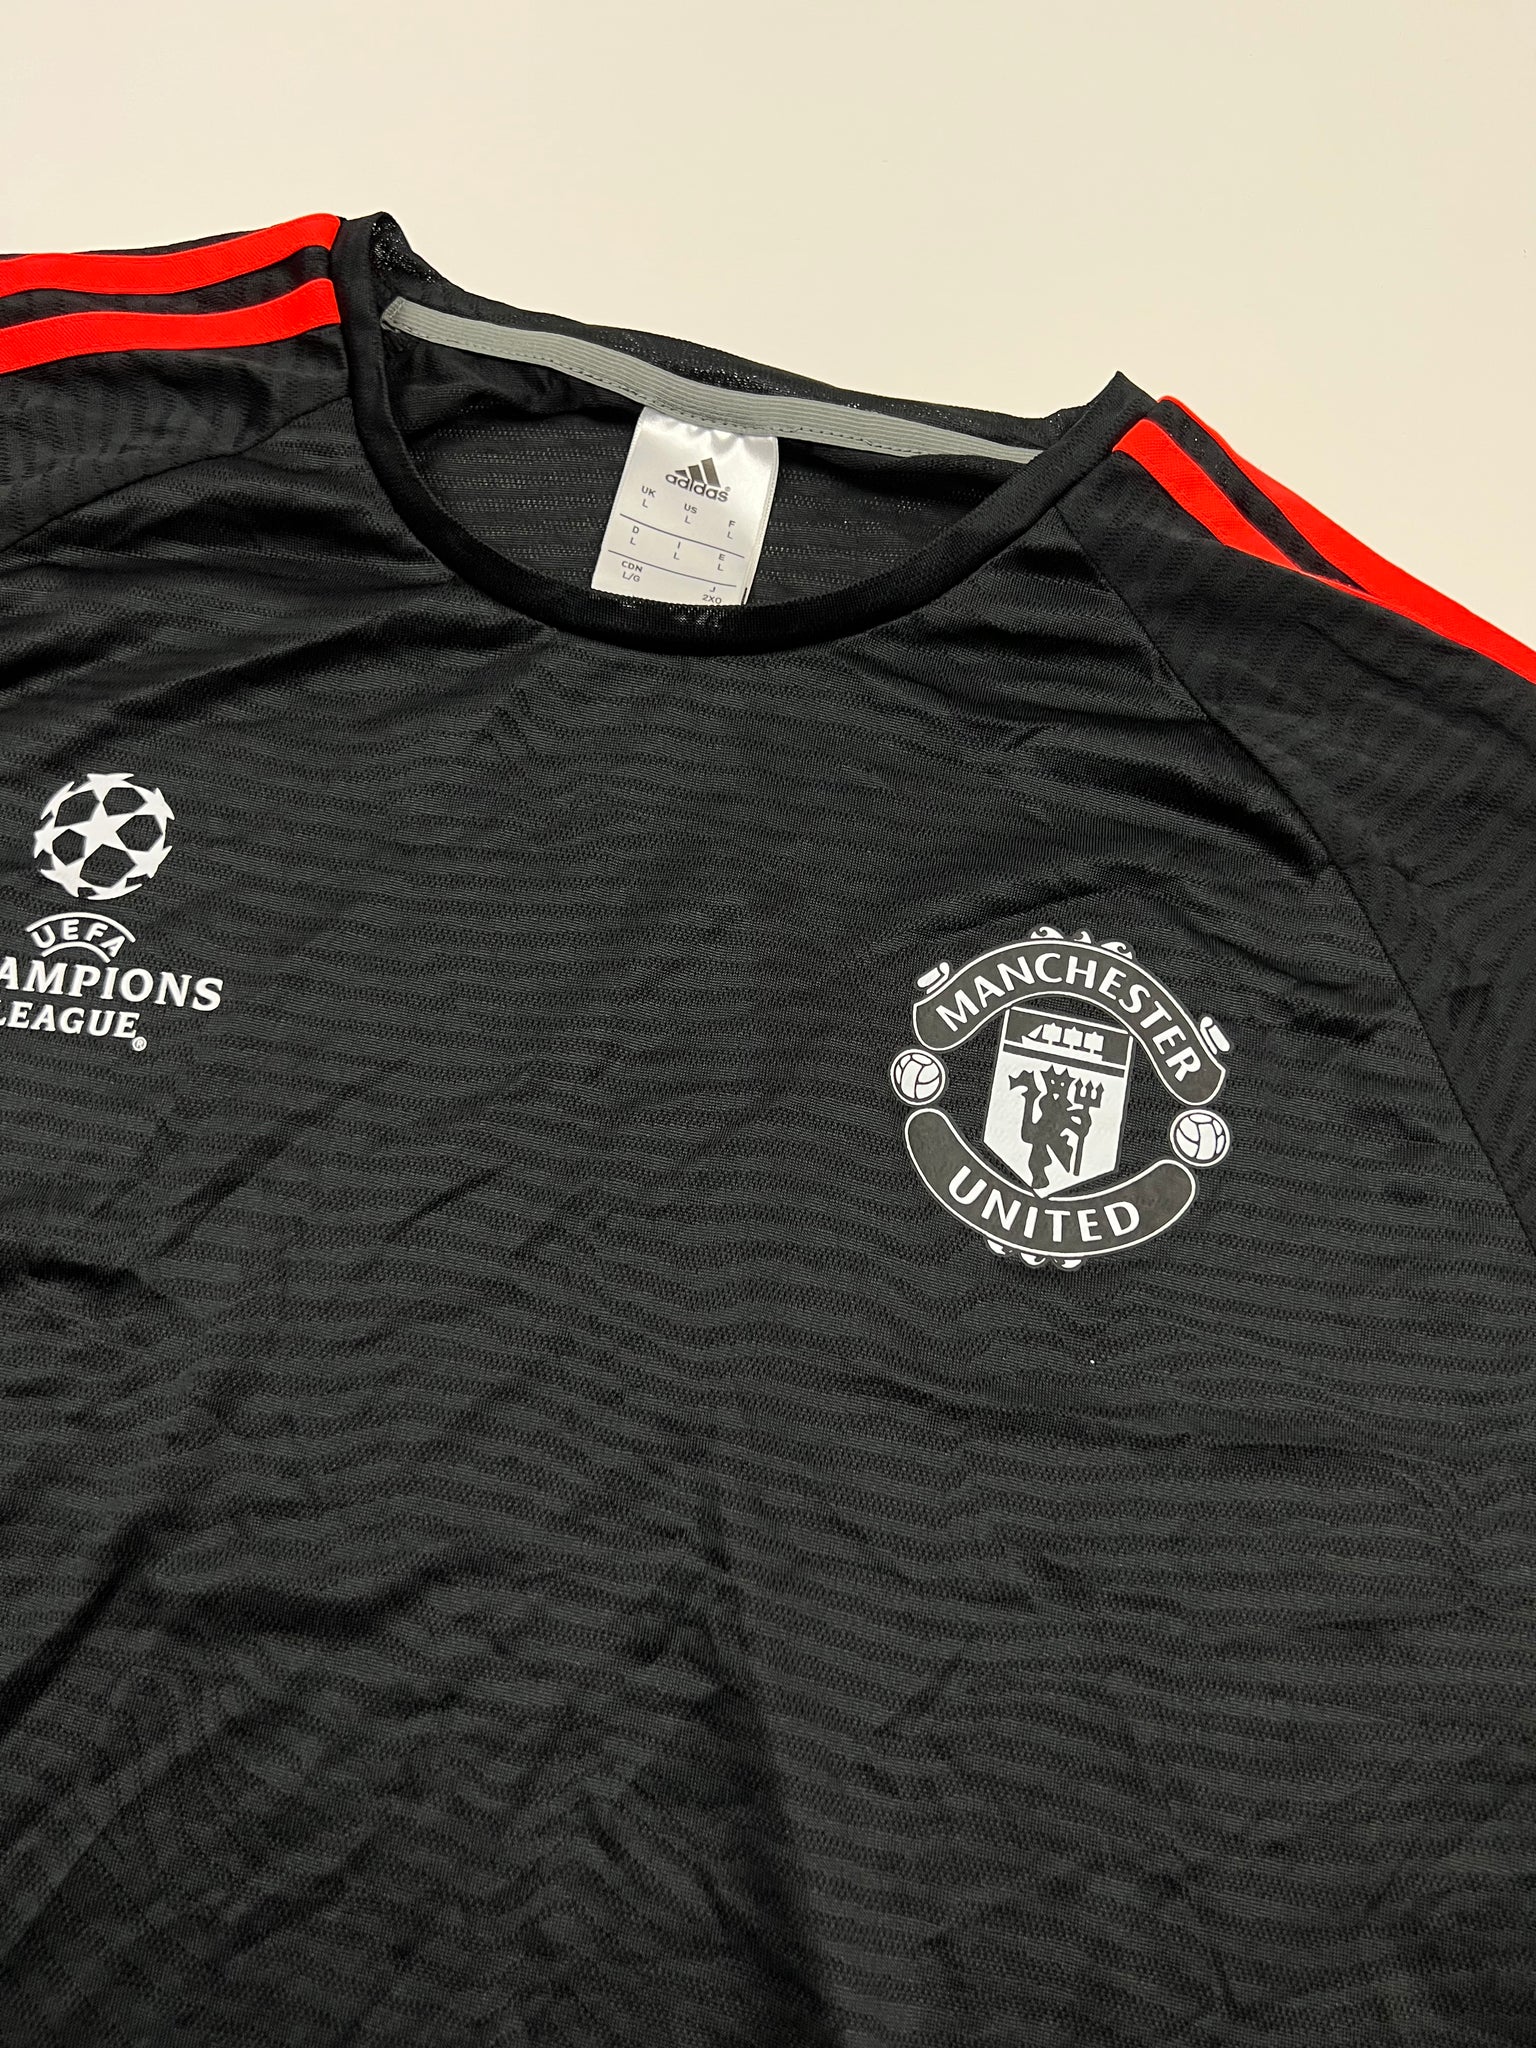 Adidas Manchester United Jersey (L)